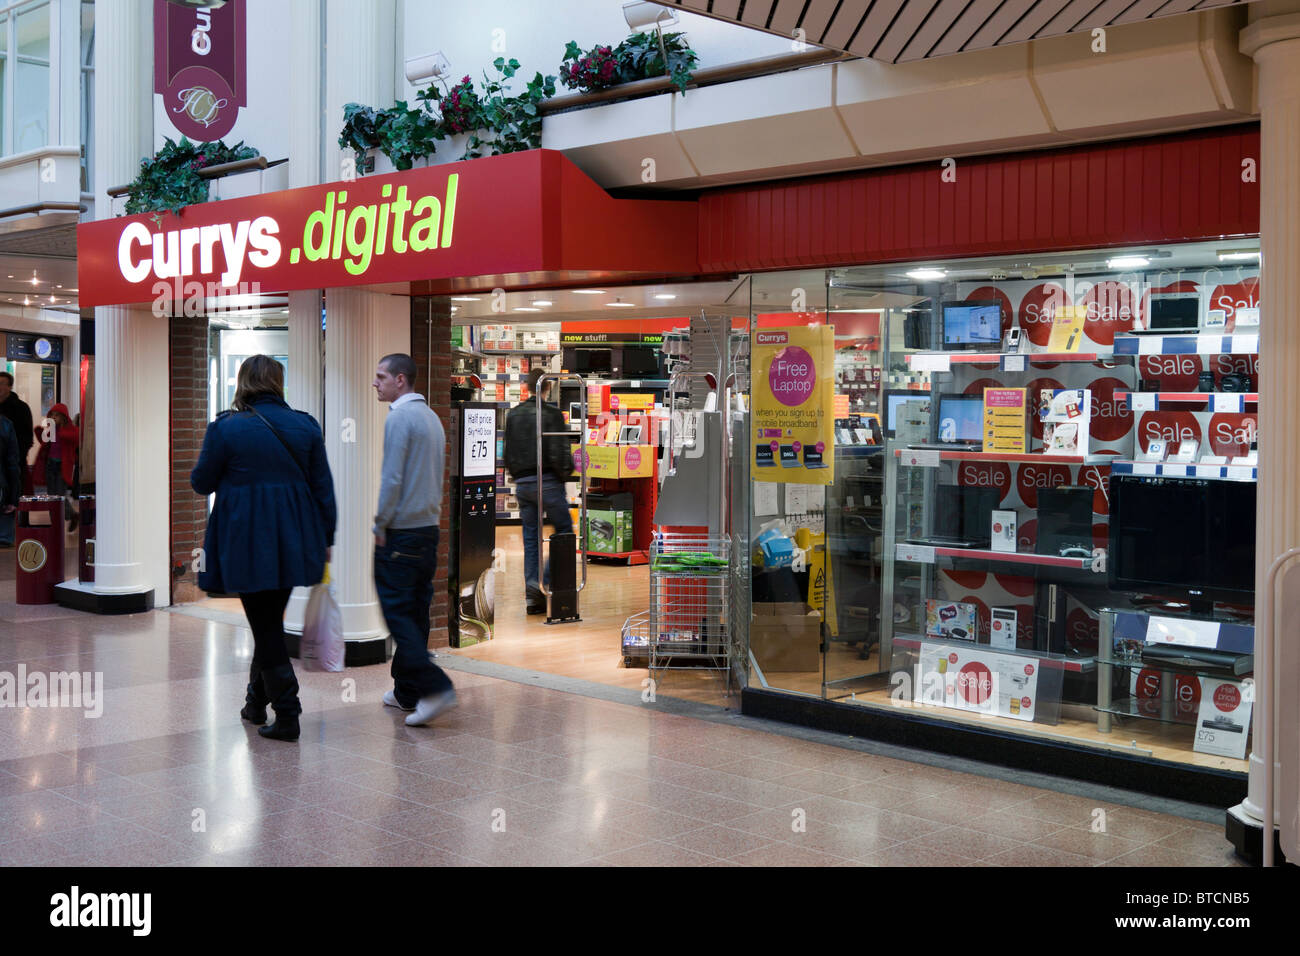 Currys Digital Electrical Store (Now Closed) - Hale Leys Shopping Centre - Aylesbury - Buckinghamshire Stock Photo